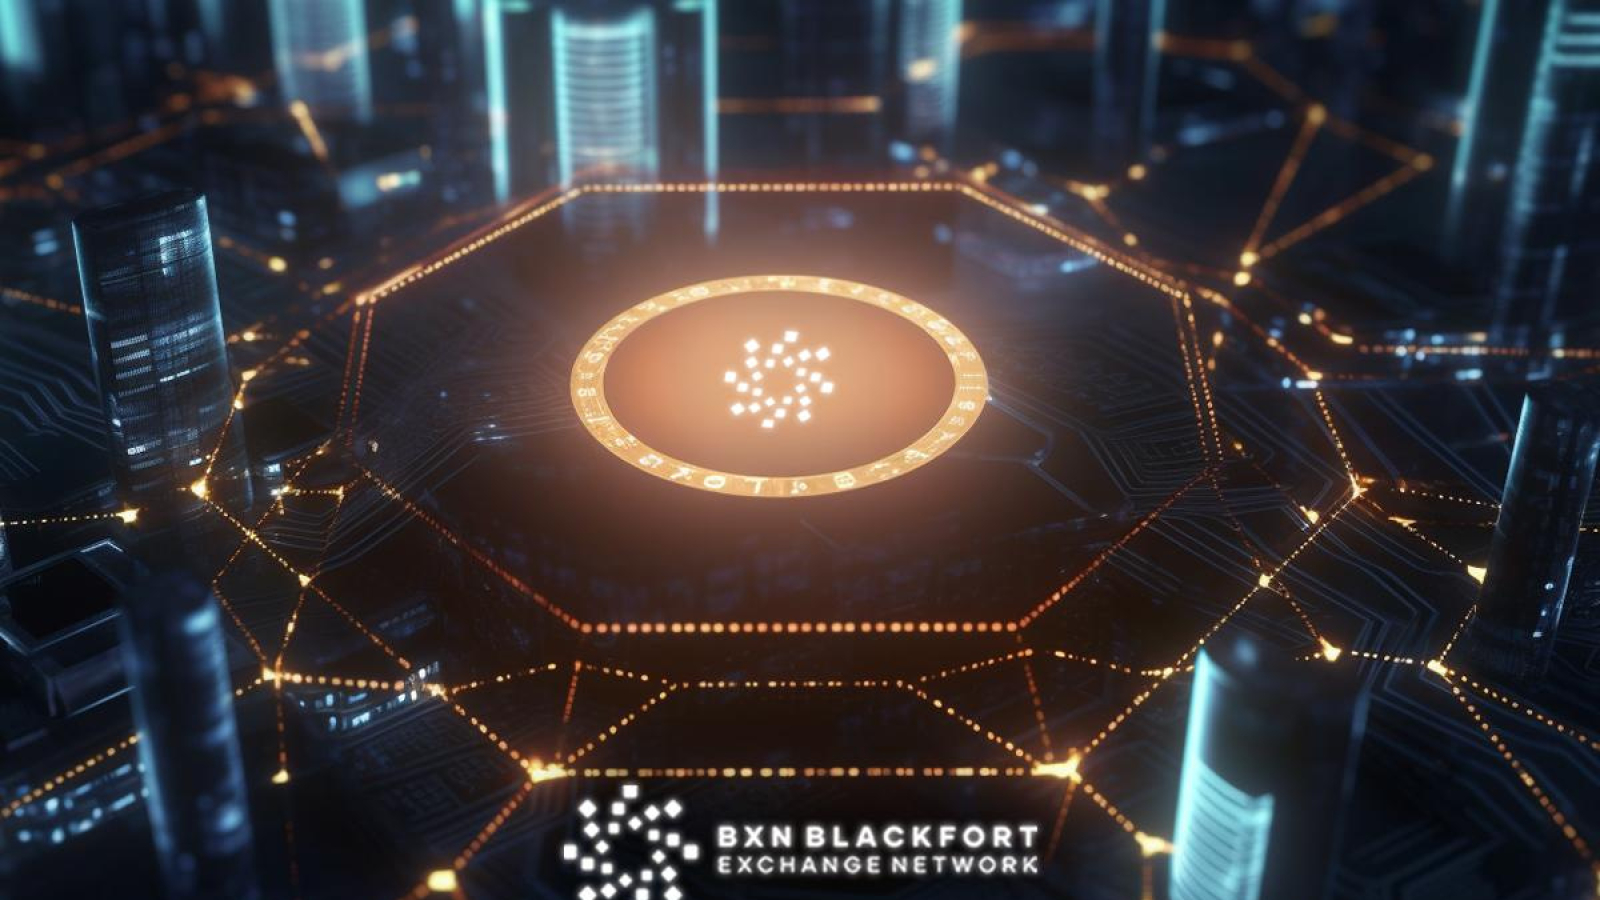 Blackfort Exchange Network Announces Join and Invite Airdrop Campaign